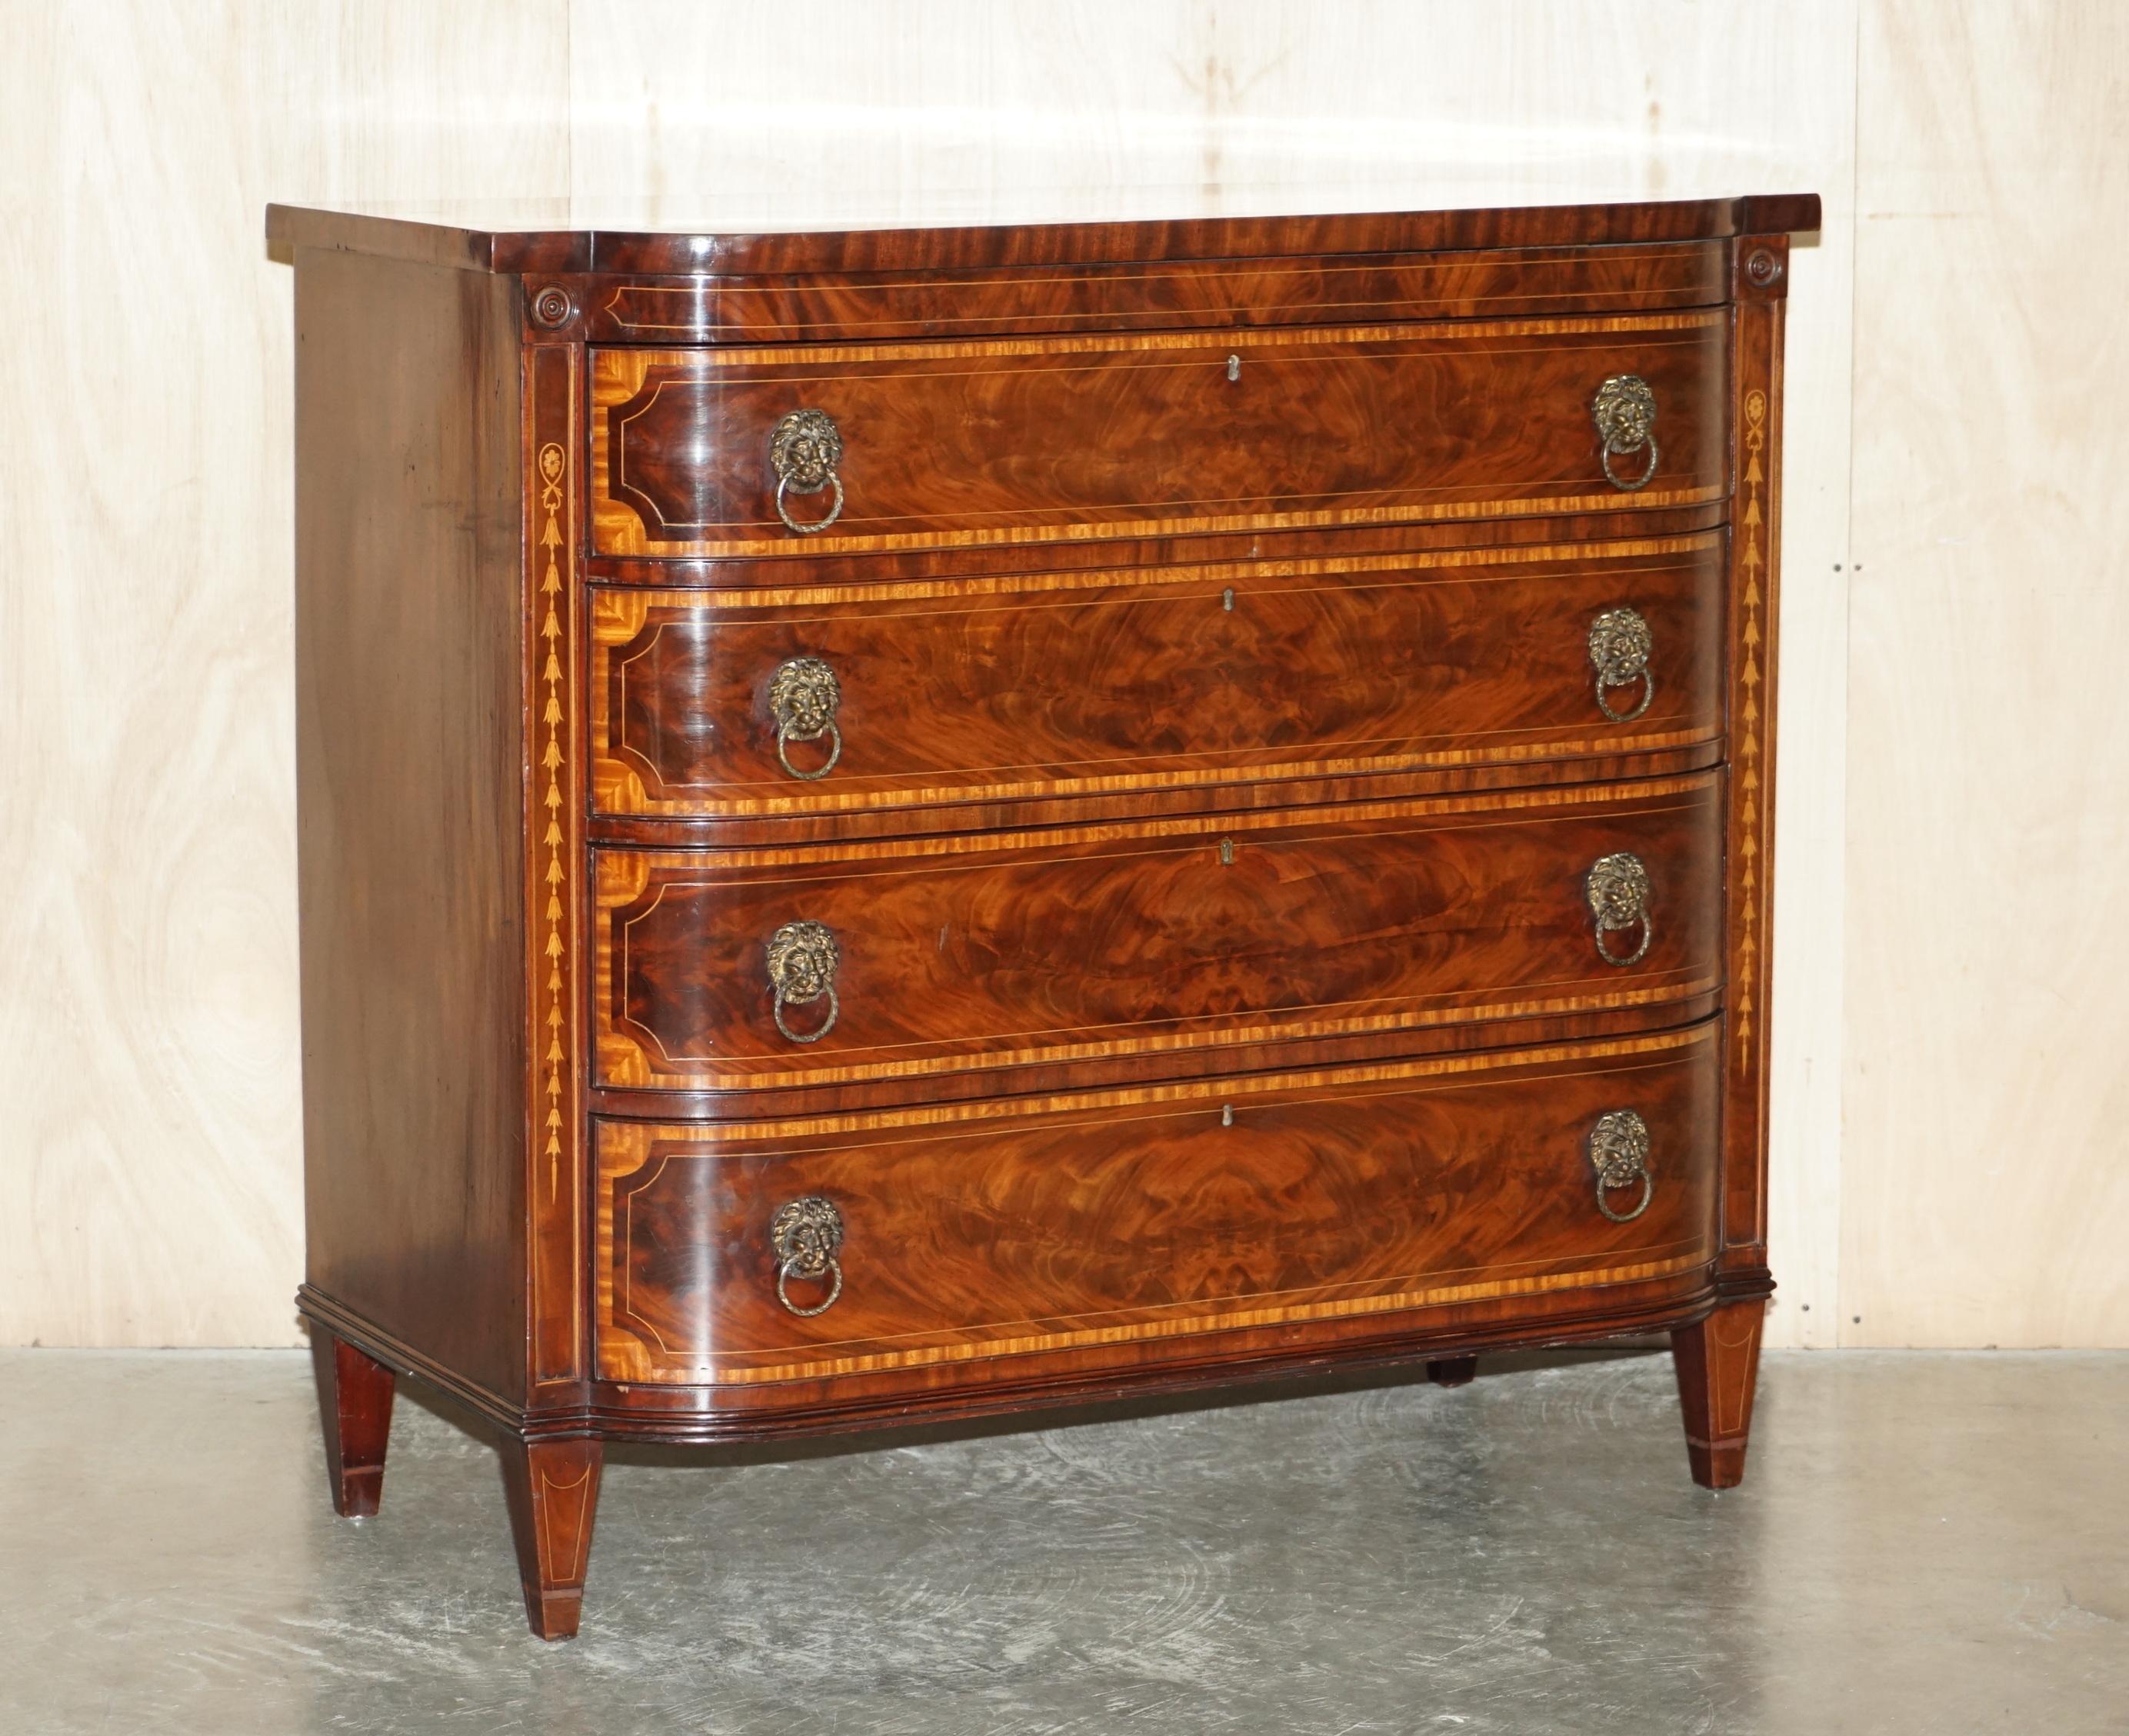 We are delighted to offer for sale this lovely absolutely exquisite, original Sheraton, flamed mahogany, bow fronted 1859 dated chest of drawers with Lion's head handles.

These drawers have a timber patina to die for, it is glorious and looks